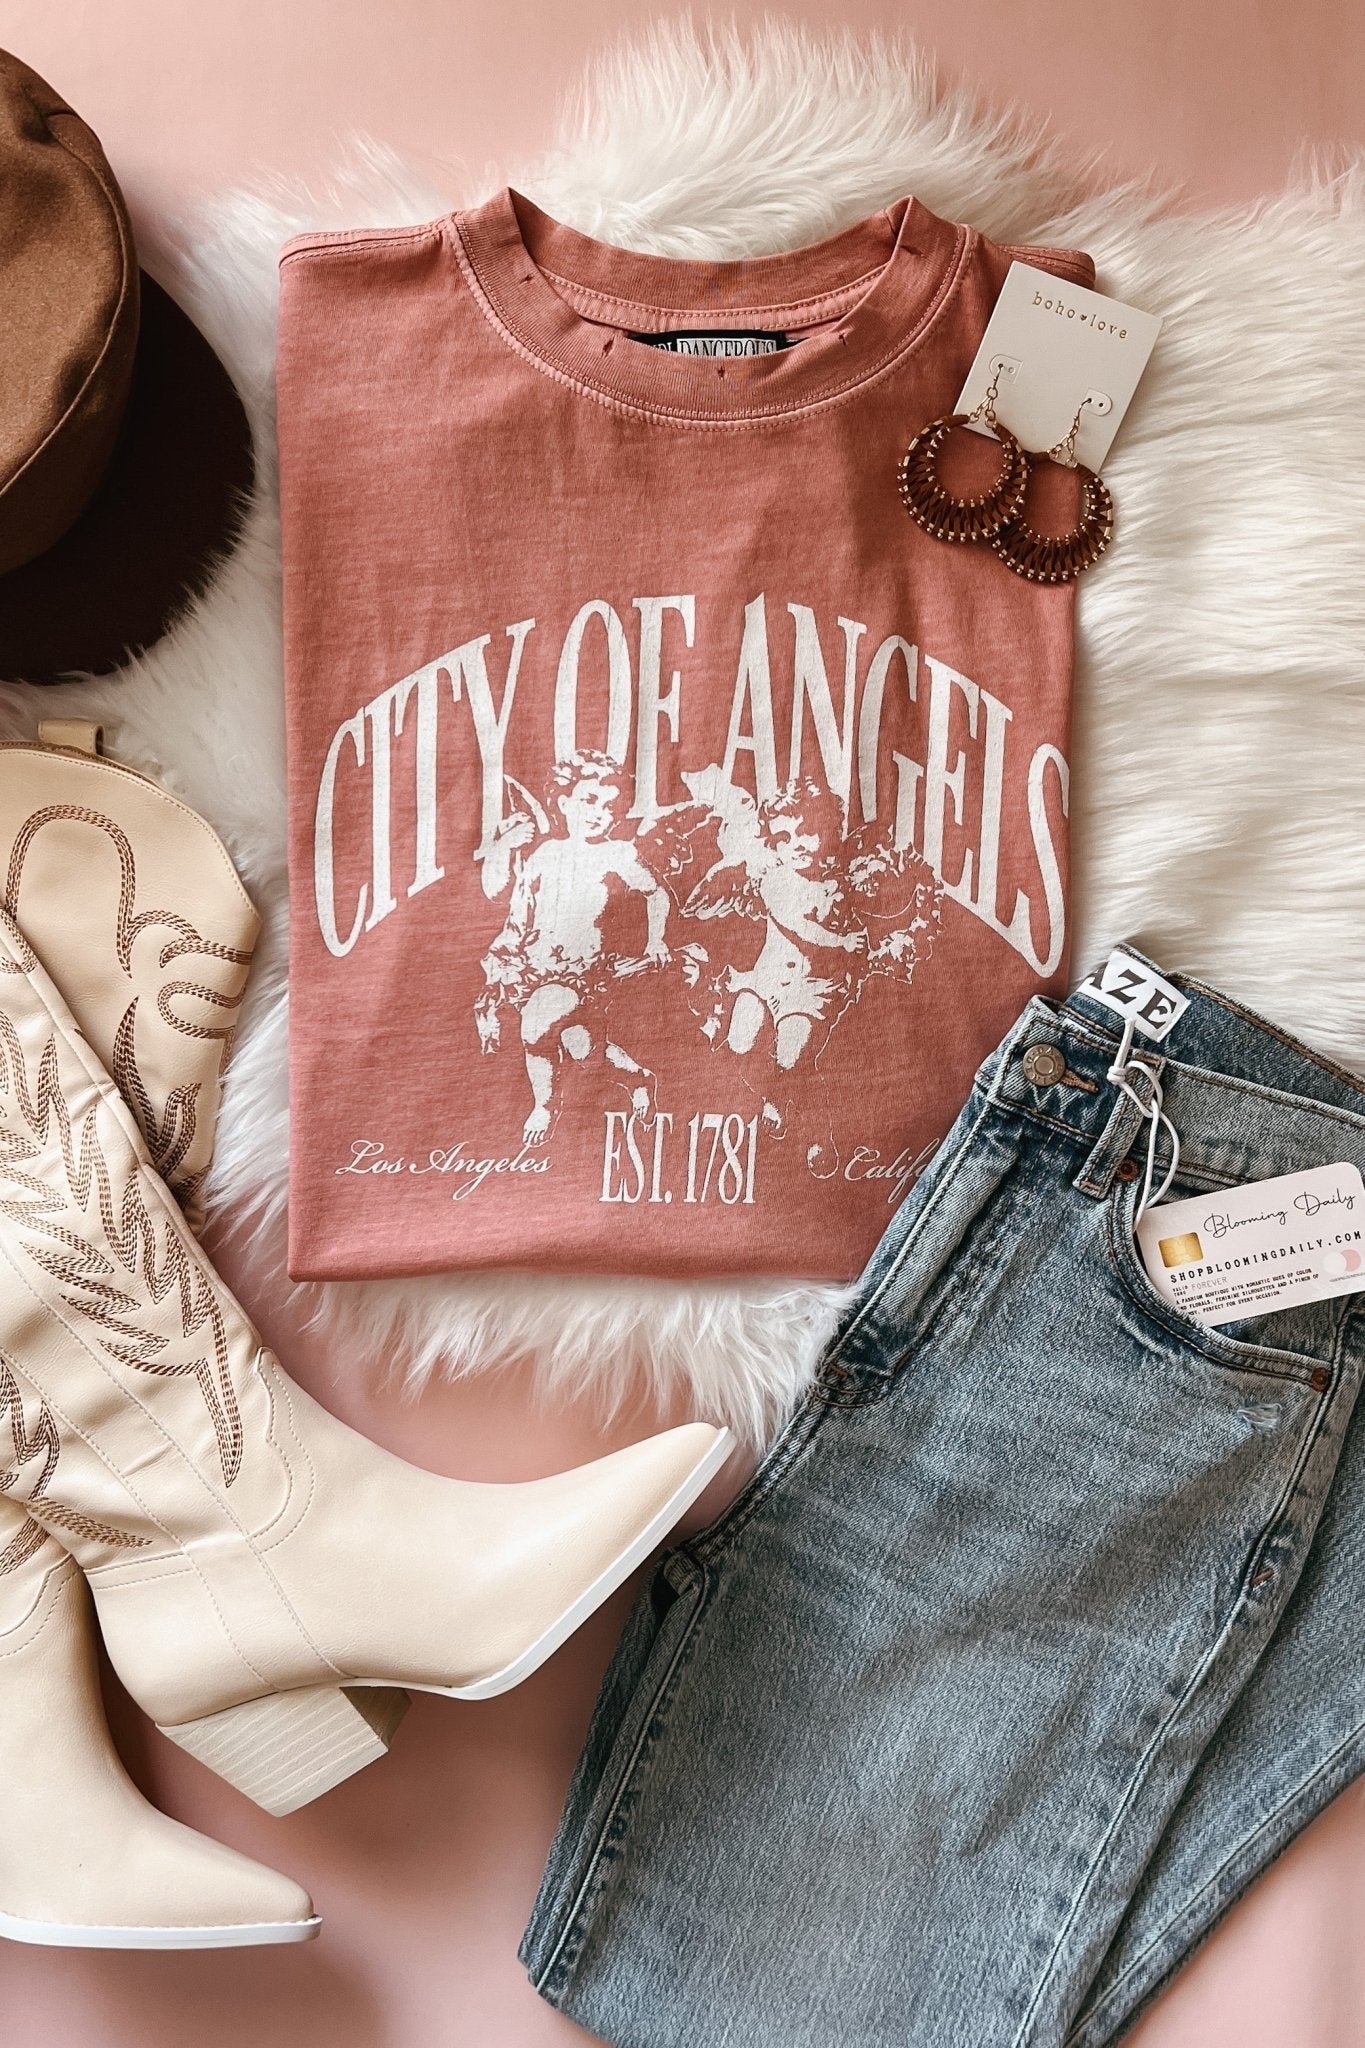 City Of Angels Graphic Tee | Girl Dangerous - Women's Shirts & Tops - Blooming Daily